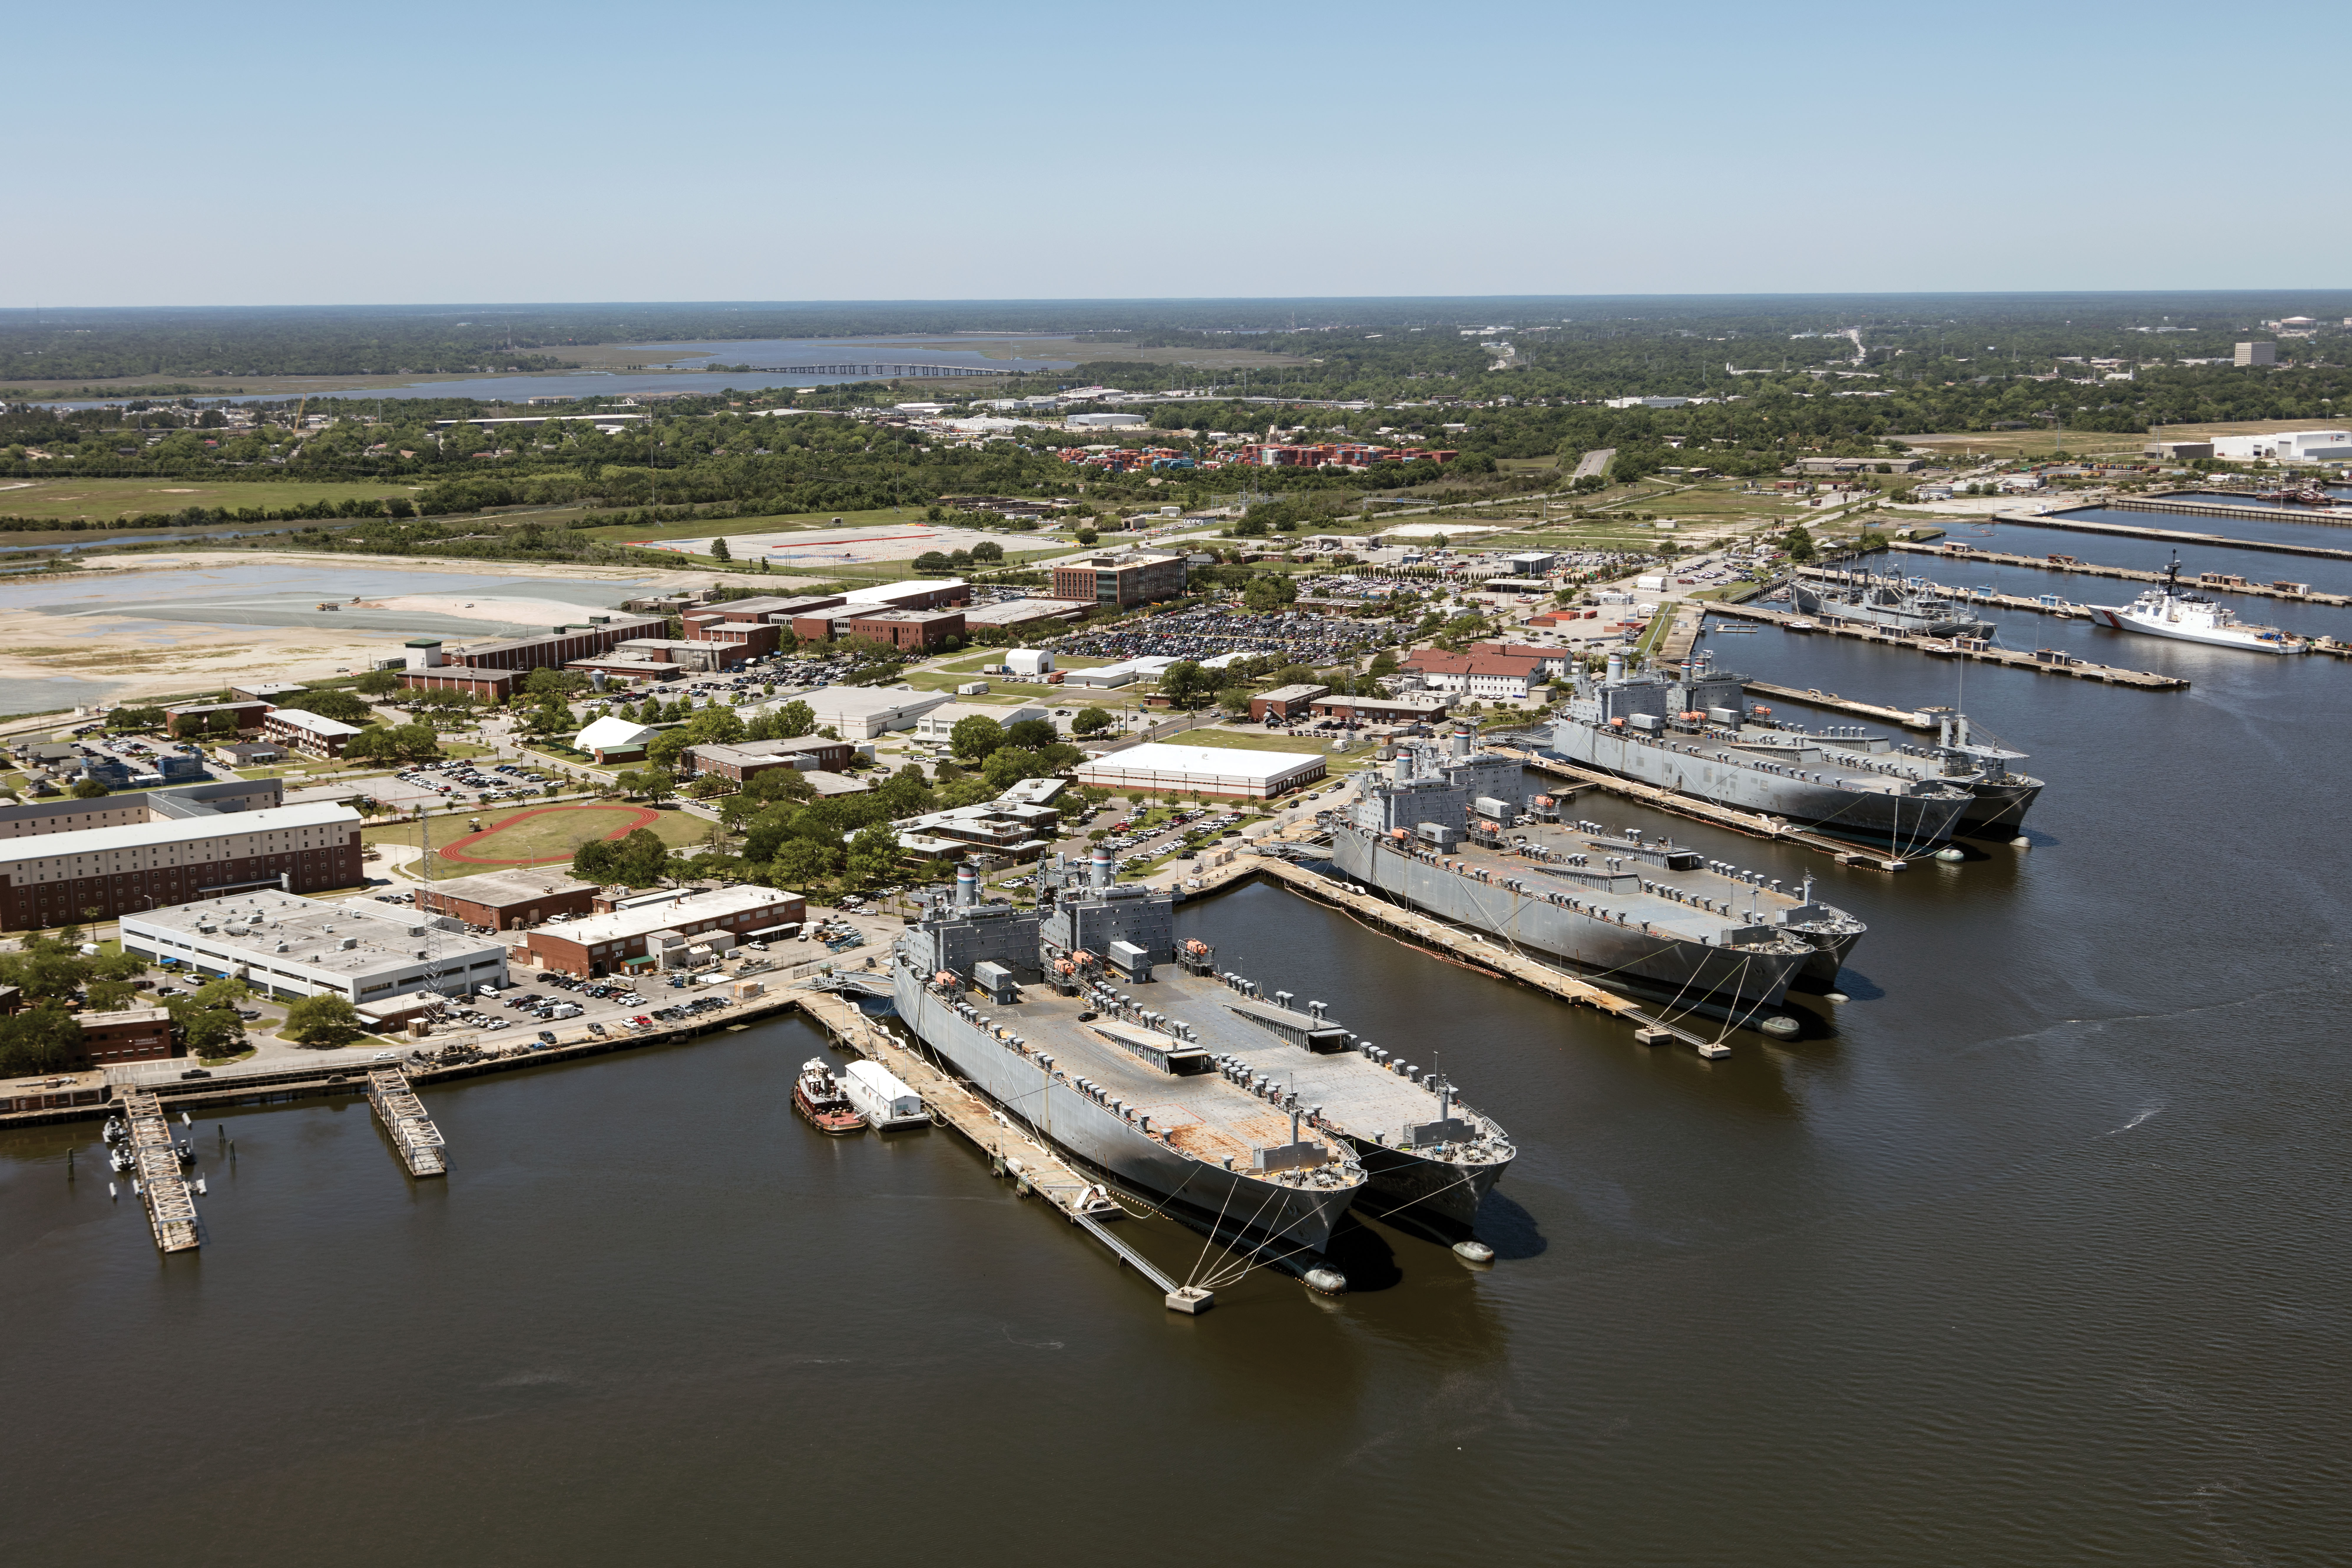 A bird’s-eye view of the former Charleston Navy Base, a shipbuilding and repair facility, which closed in 1996.